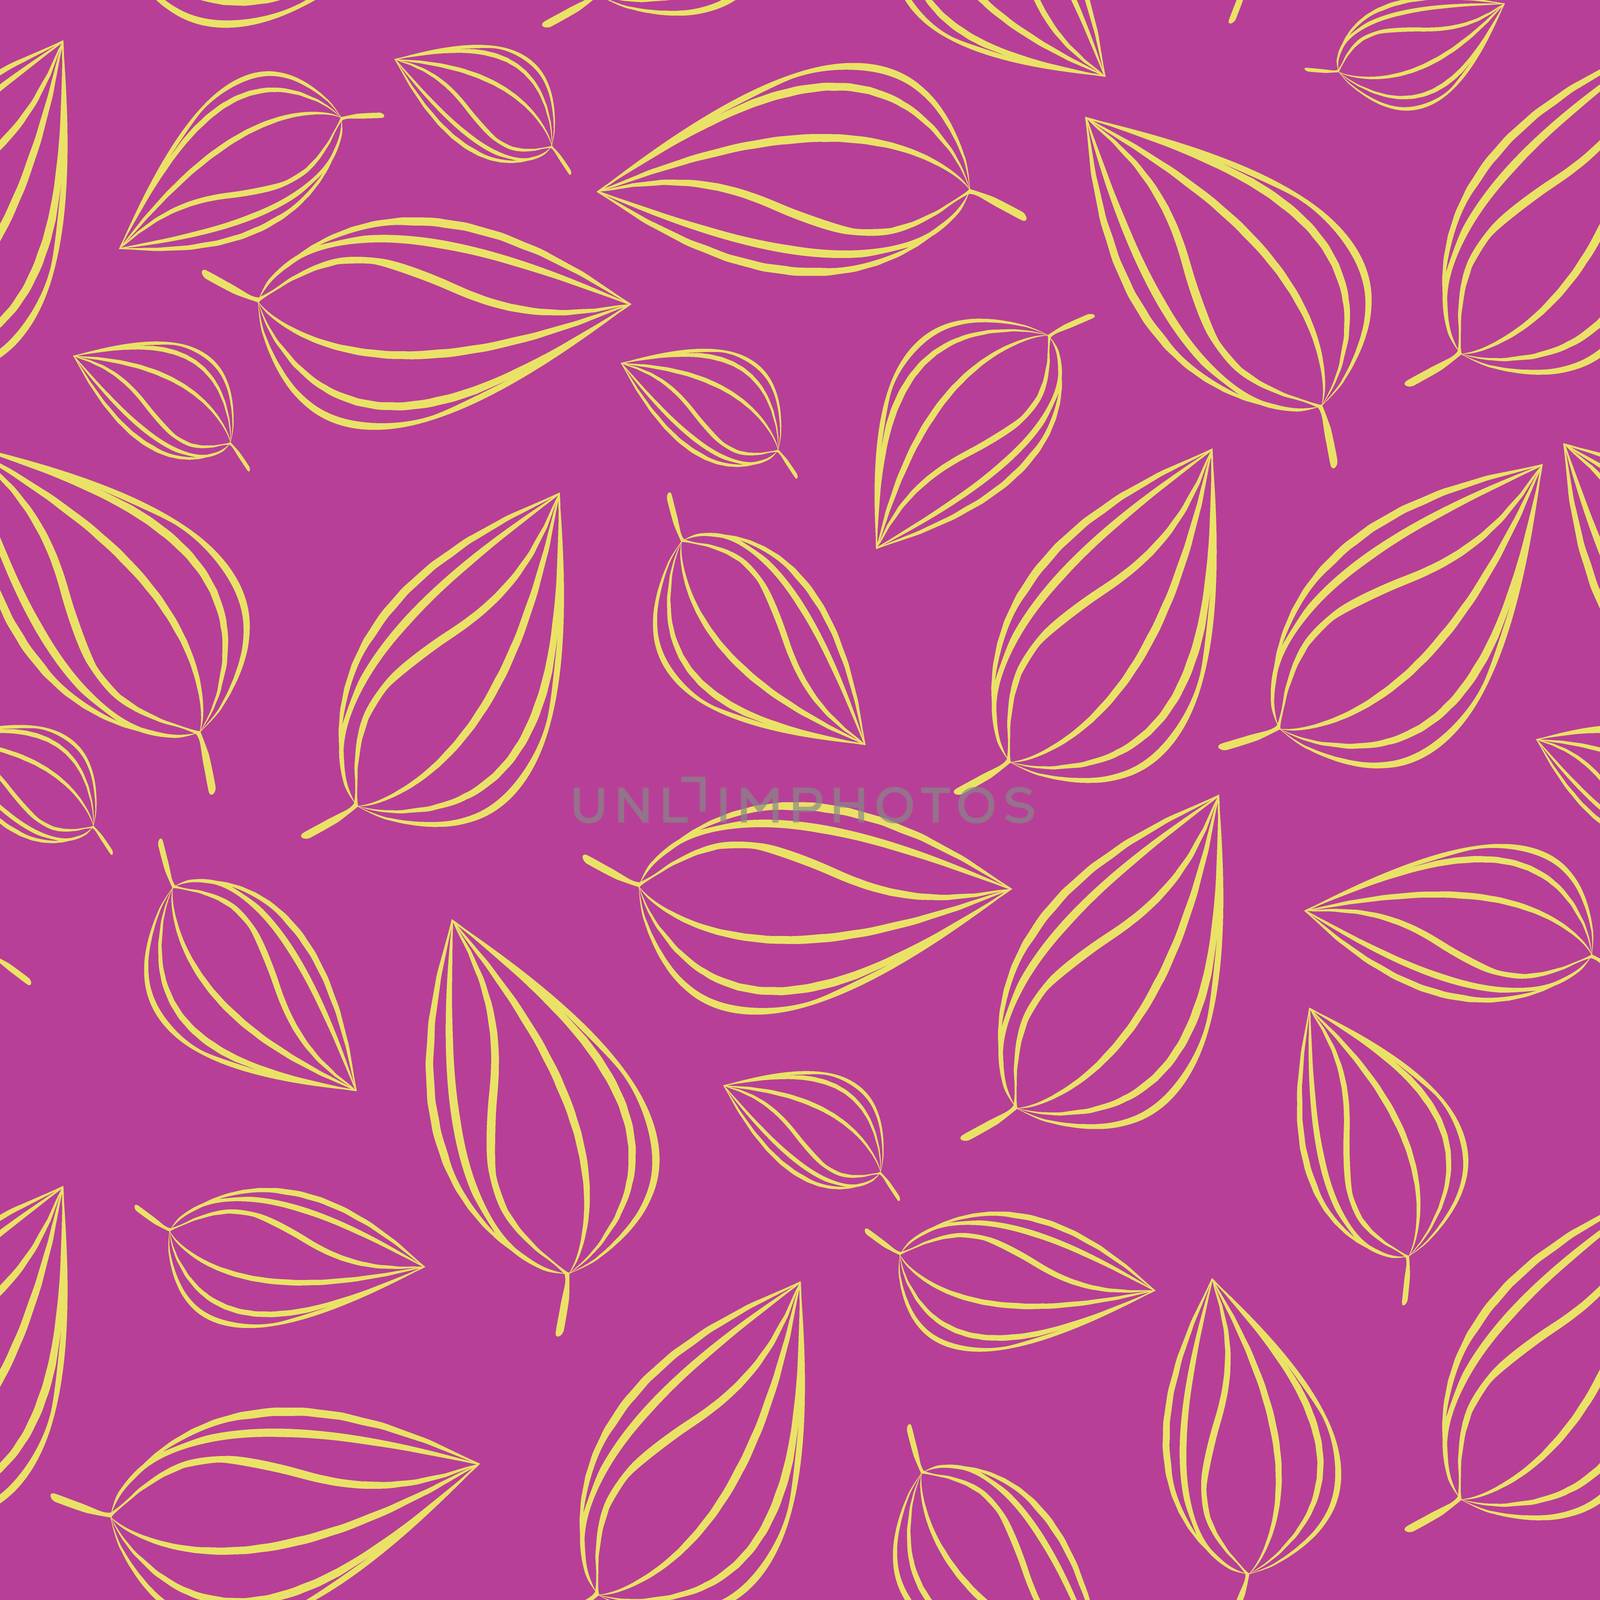 Seamless pattern background with autumn leaves. illustration. by Asnia